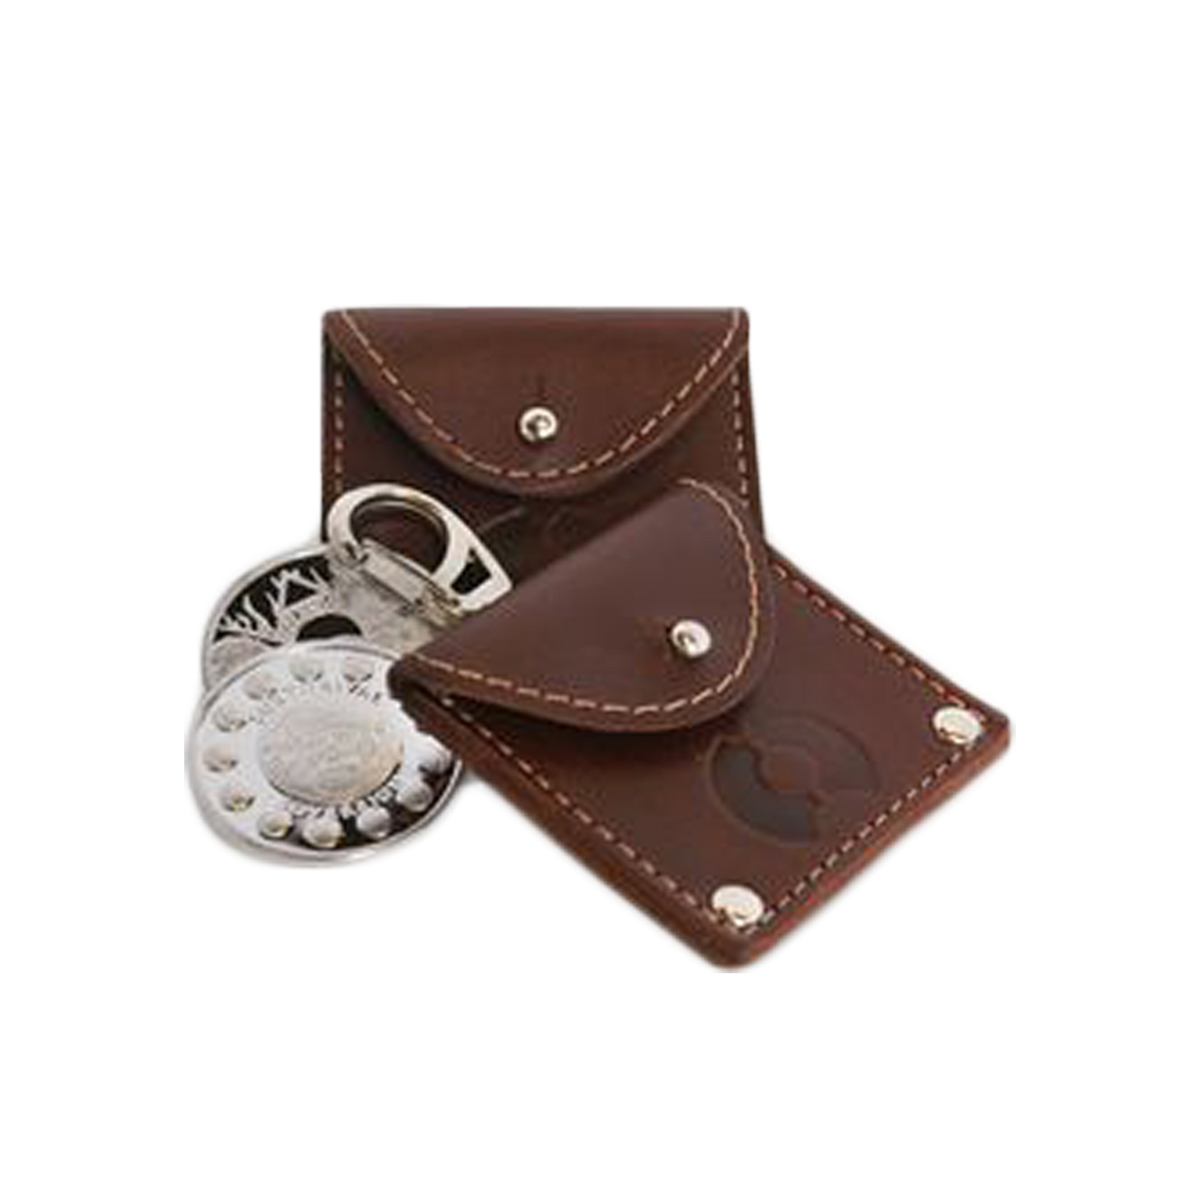 Surthrival Coin Pouch